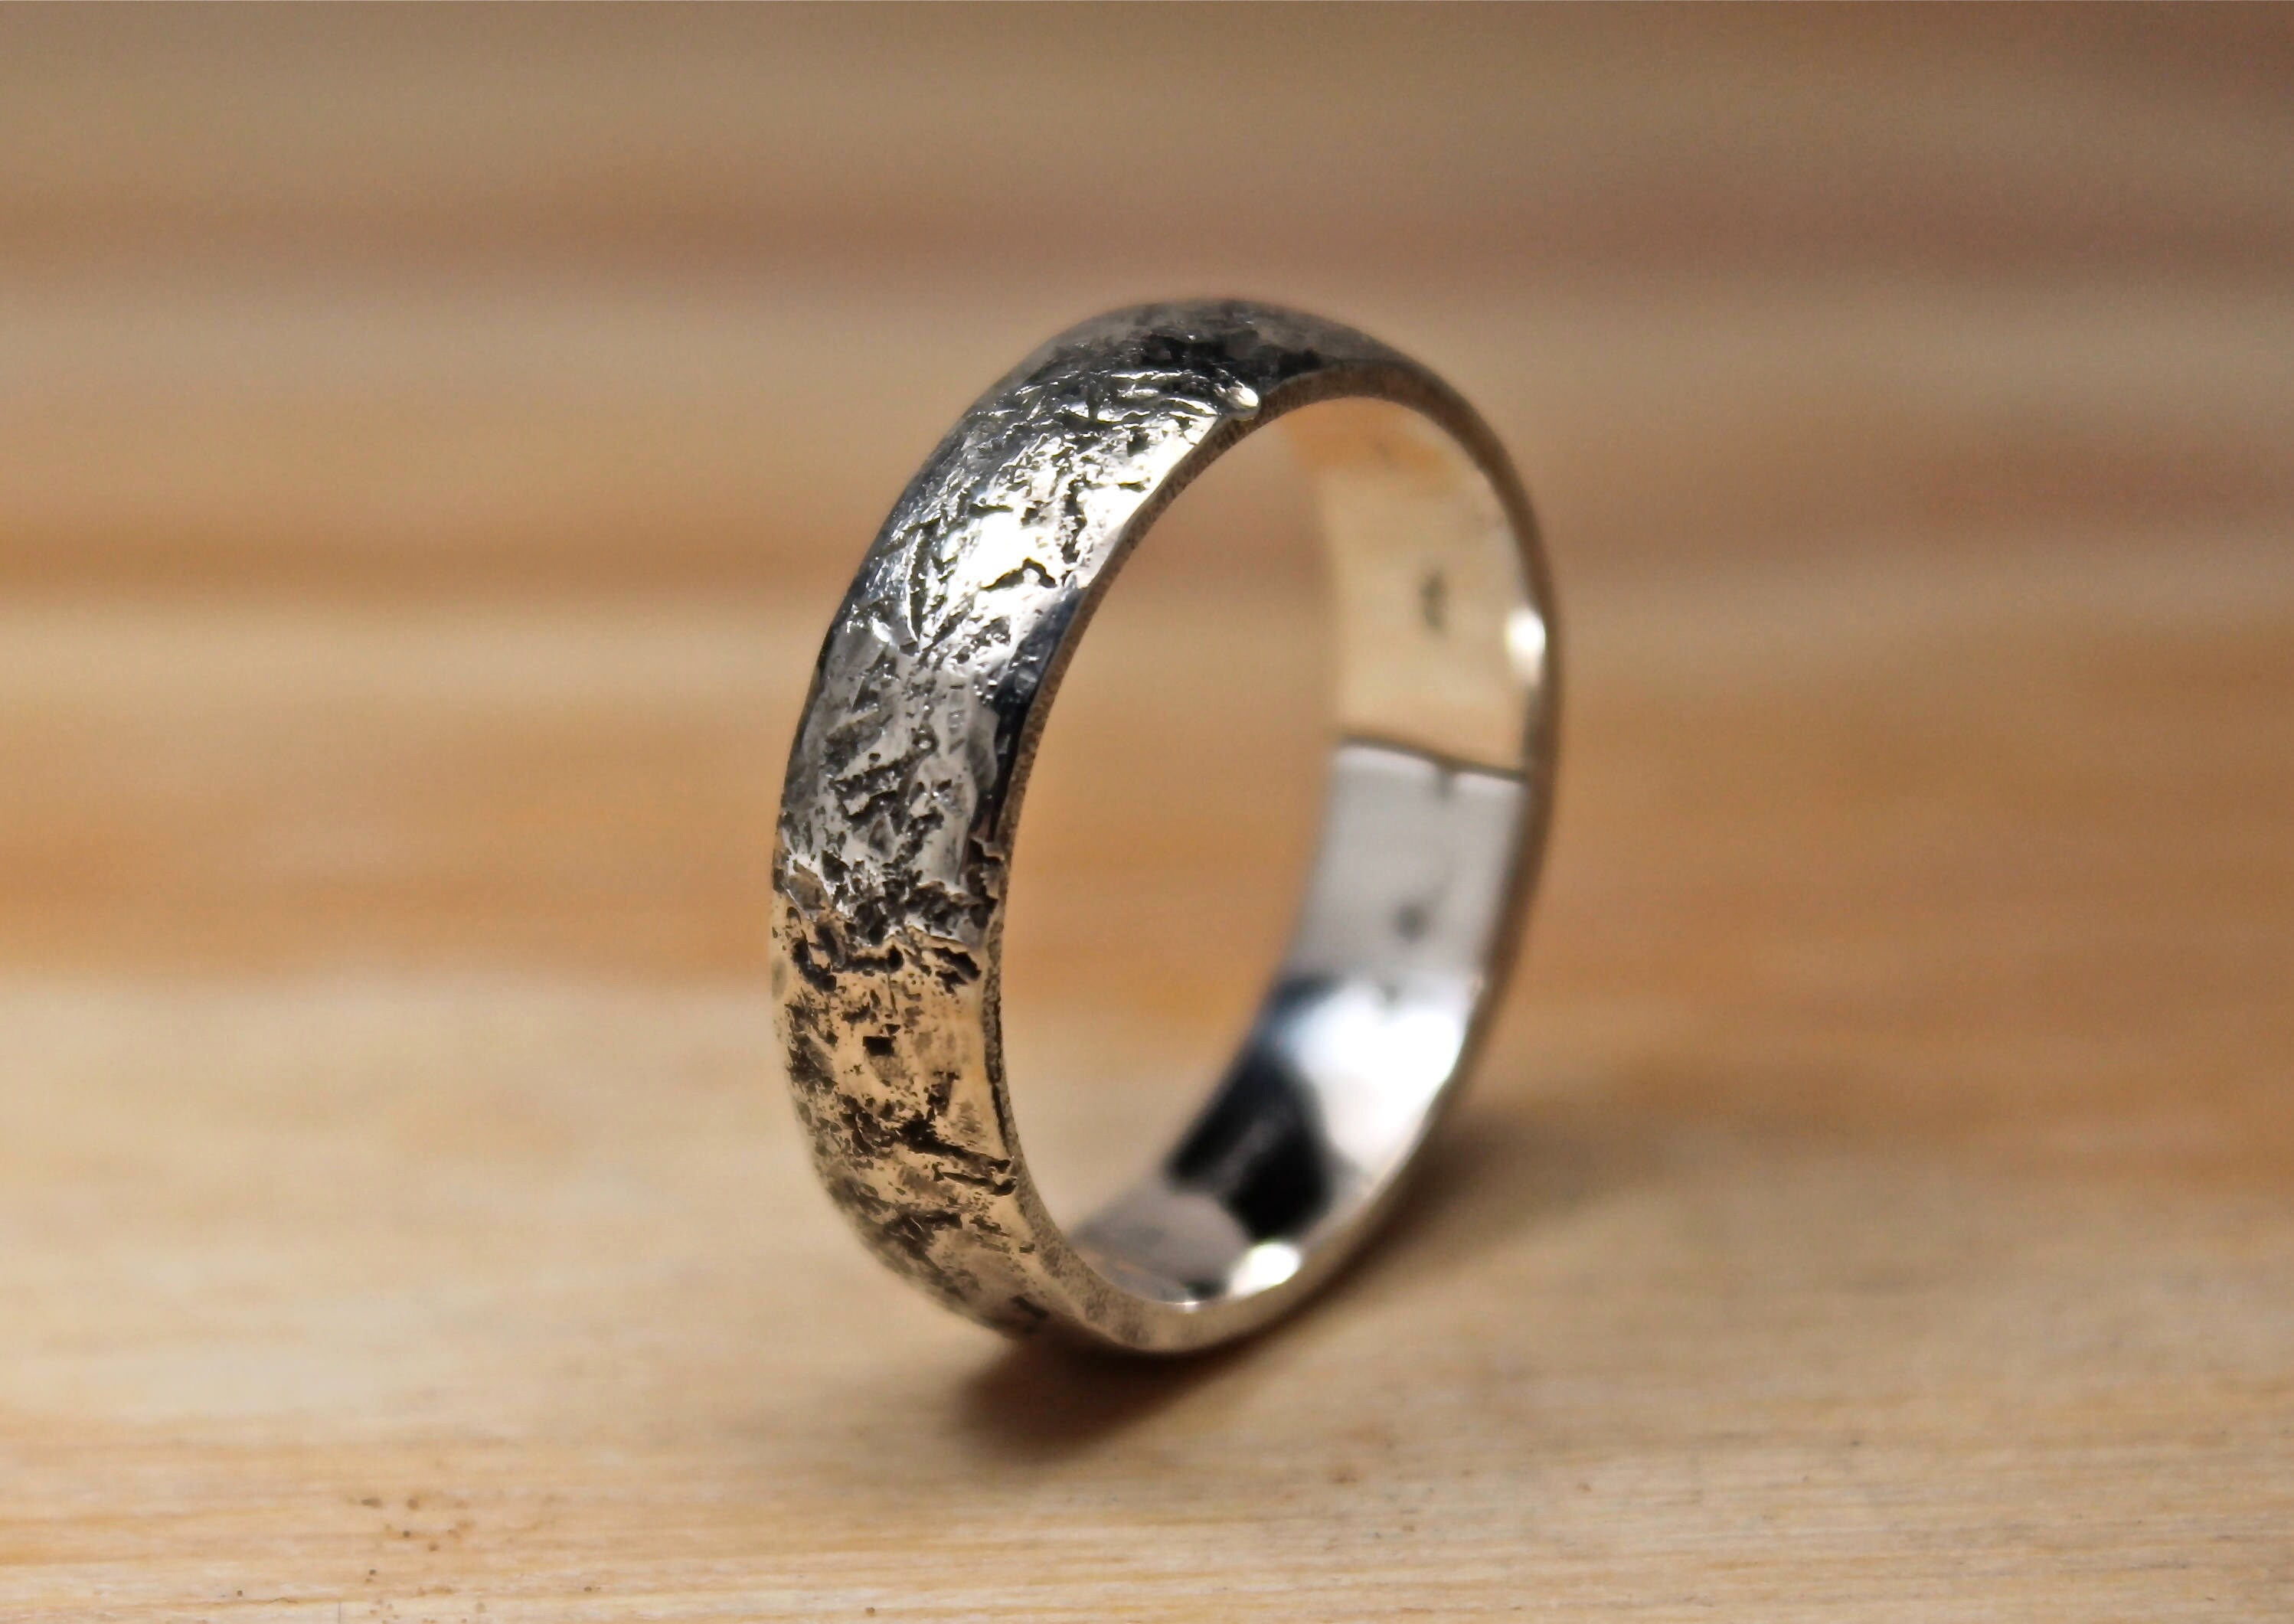 Hand Hammered Silver Band, Medieval Wedding Ring, Ancient Textured Forged Ring 5mm